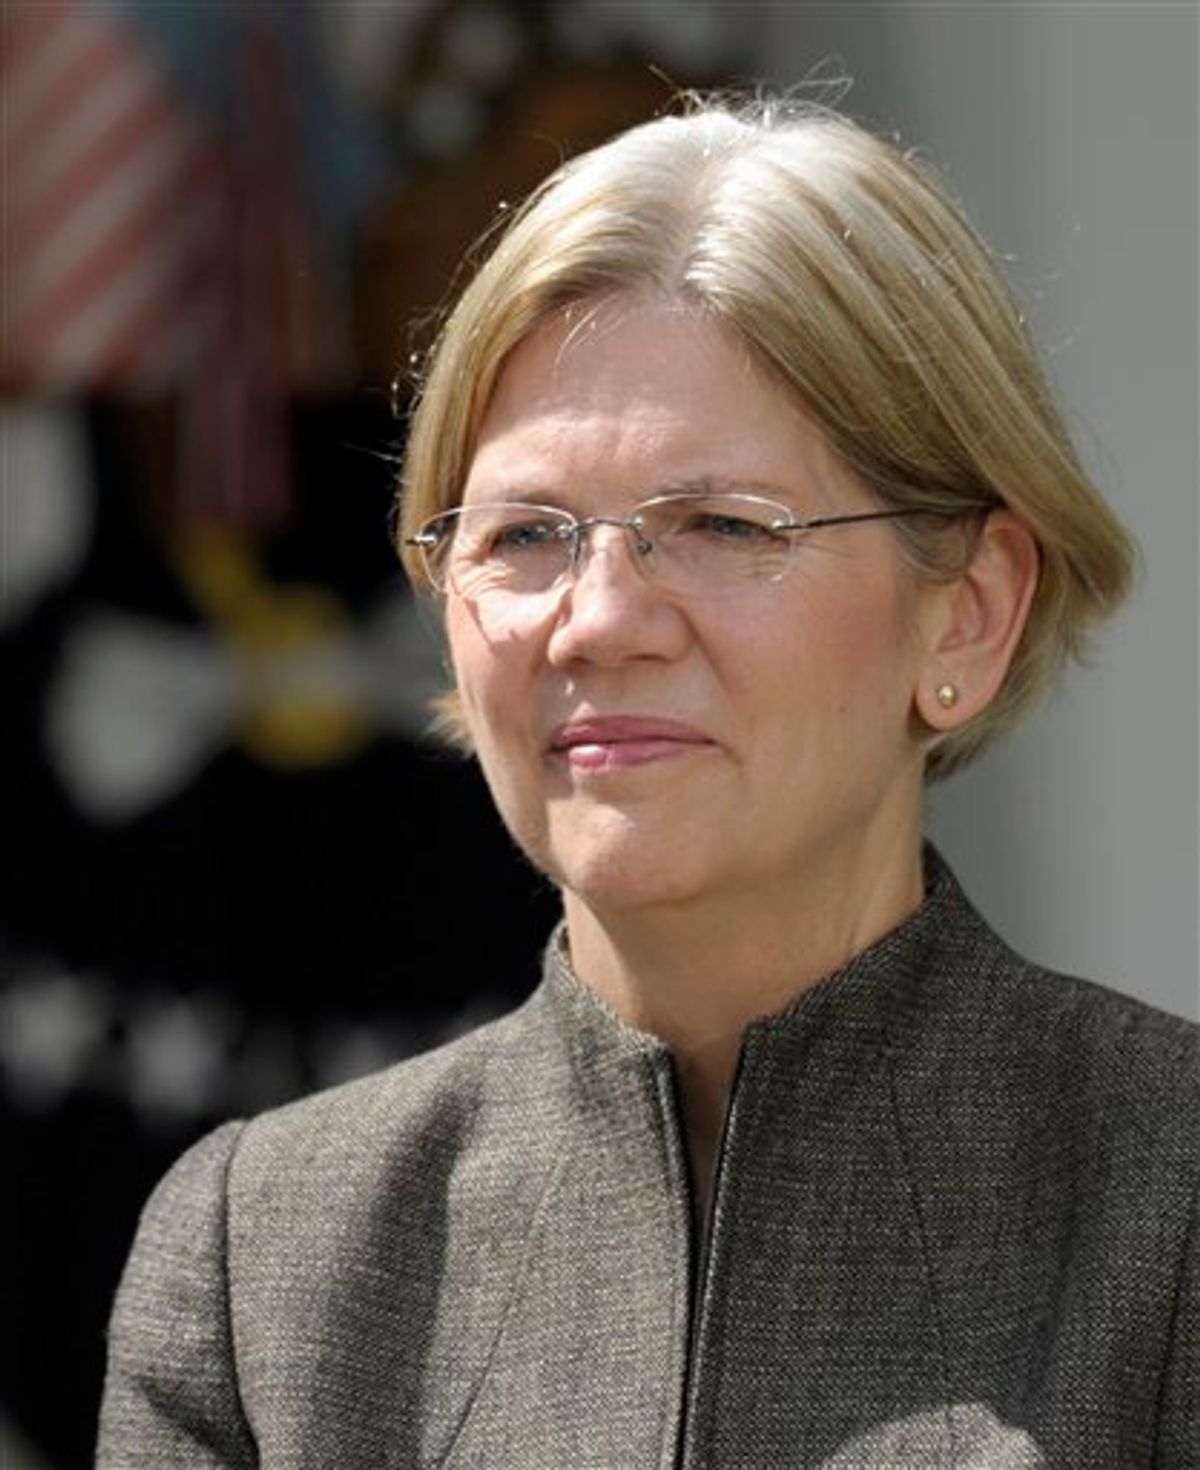 Elizabeth Warren is seen in the Rose Garden of the White House in Washington, Friday, Sept. 17, 2010, where President Barack Obama announces that she will head the Consumer Financial Protection Bureau. (AP Photo/Susan Walsh) (AP)